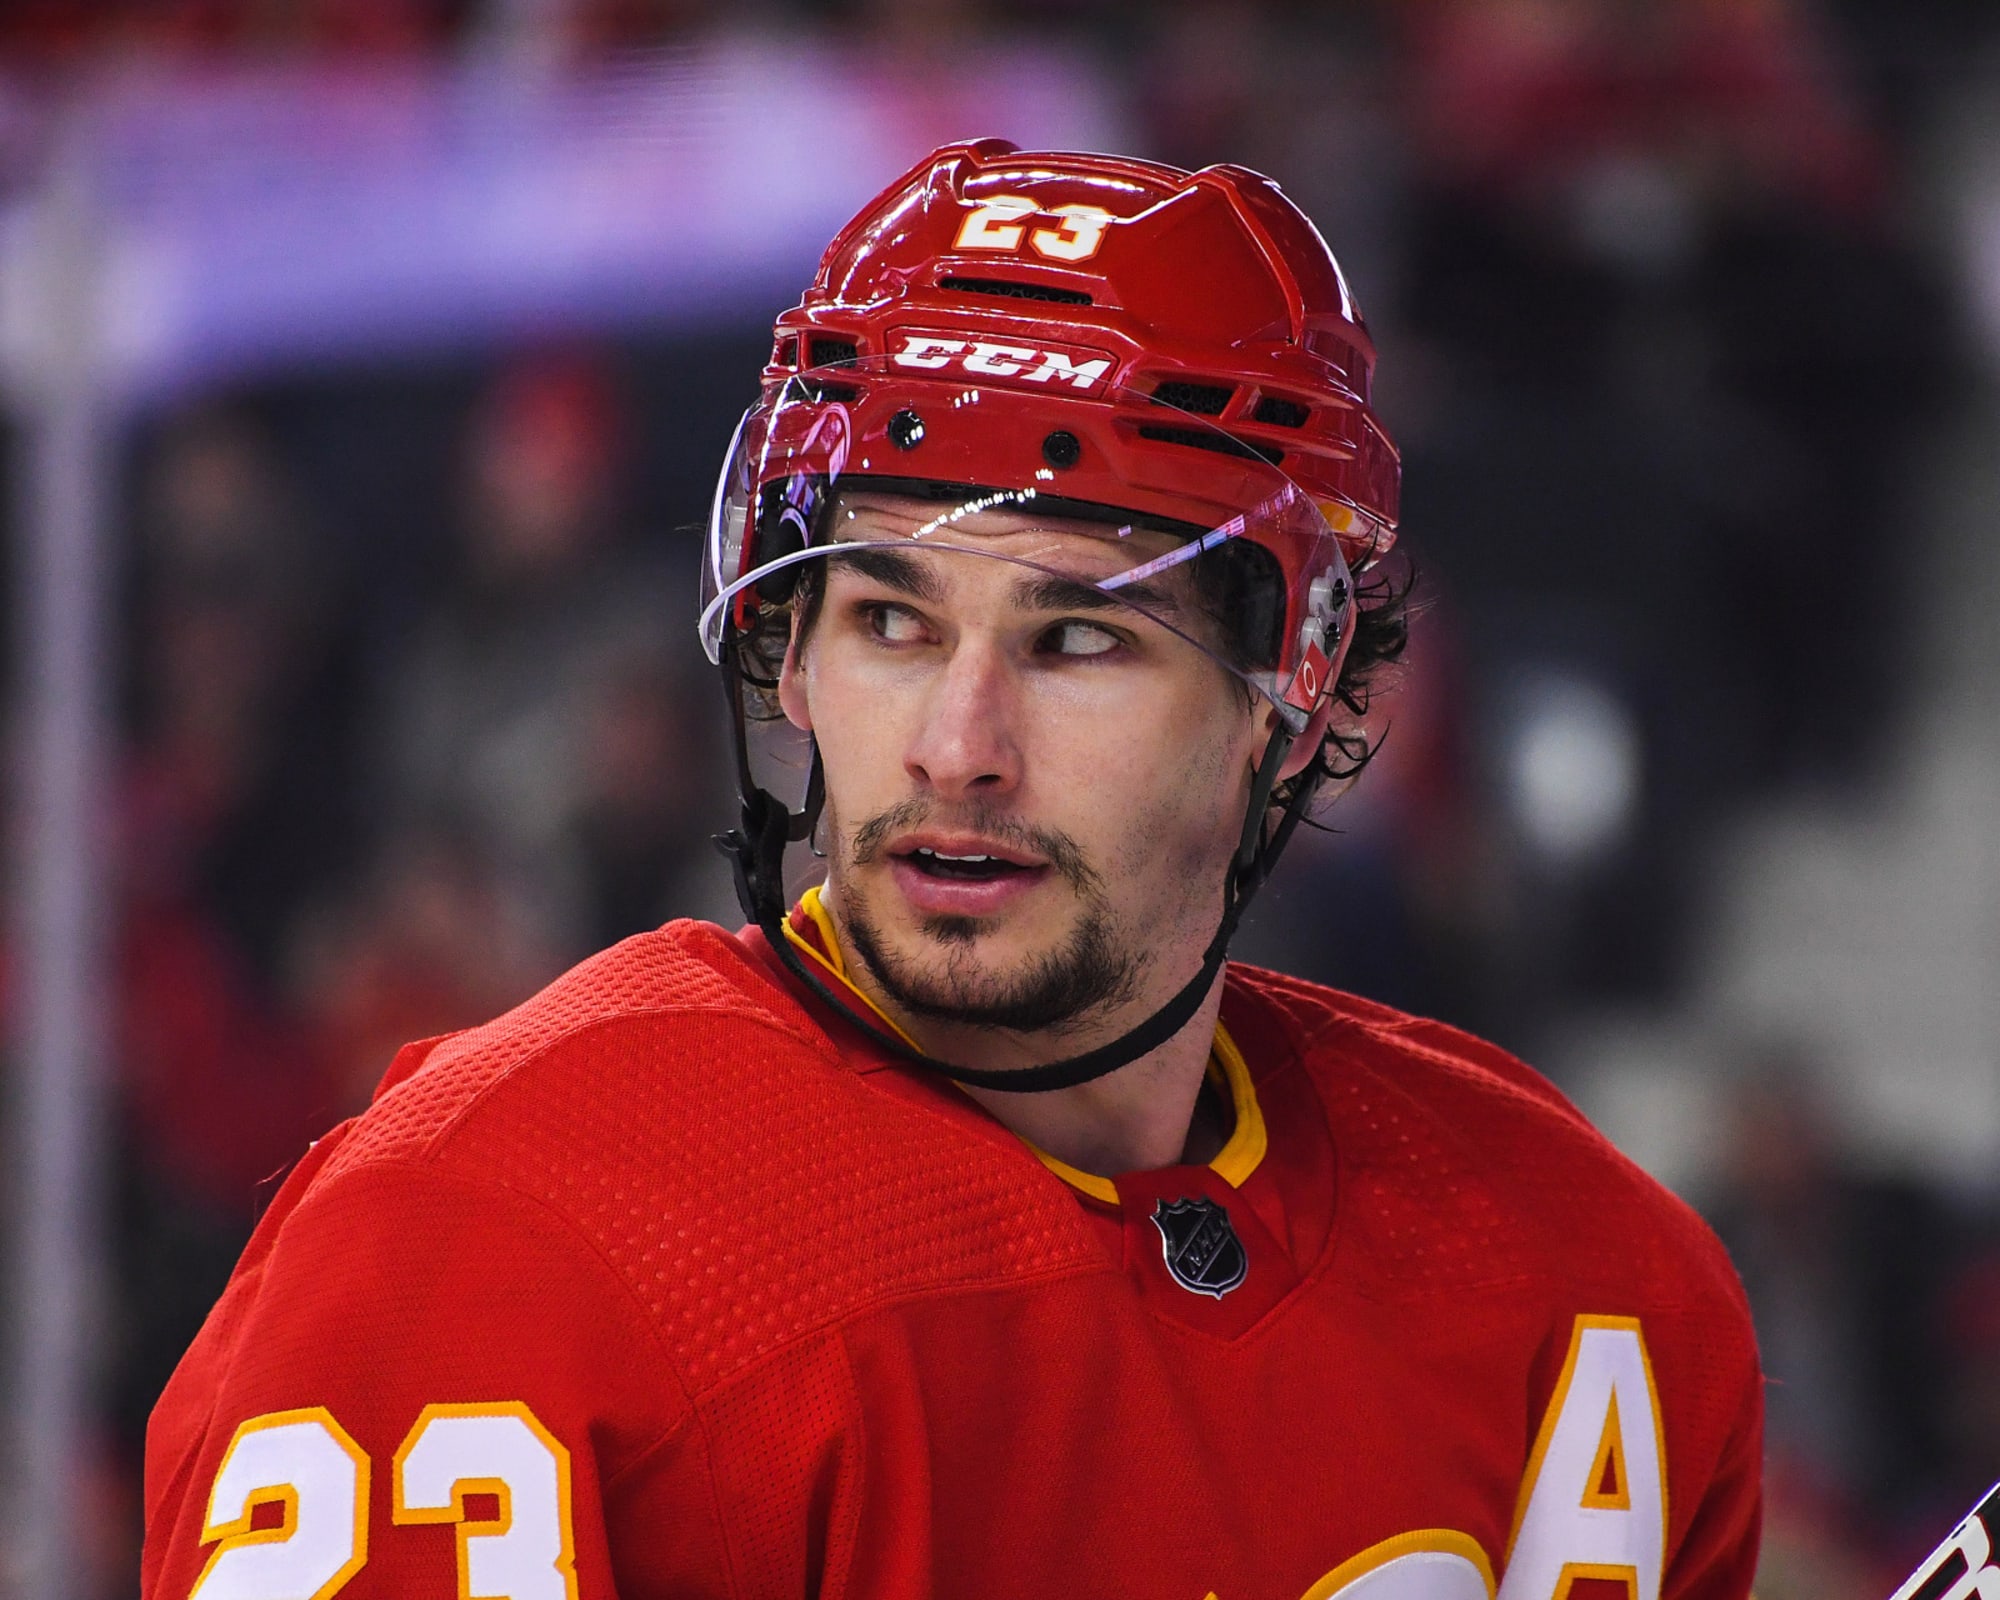 Sean Monahan could be the big center available in the offseason